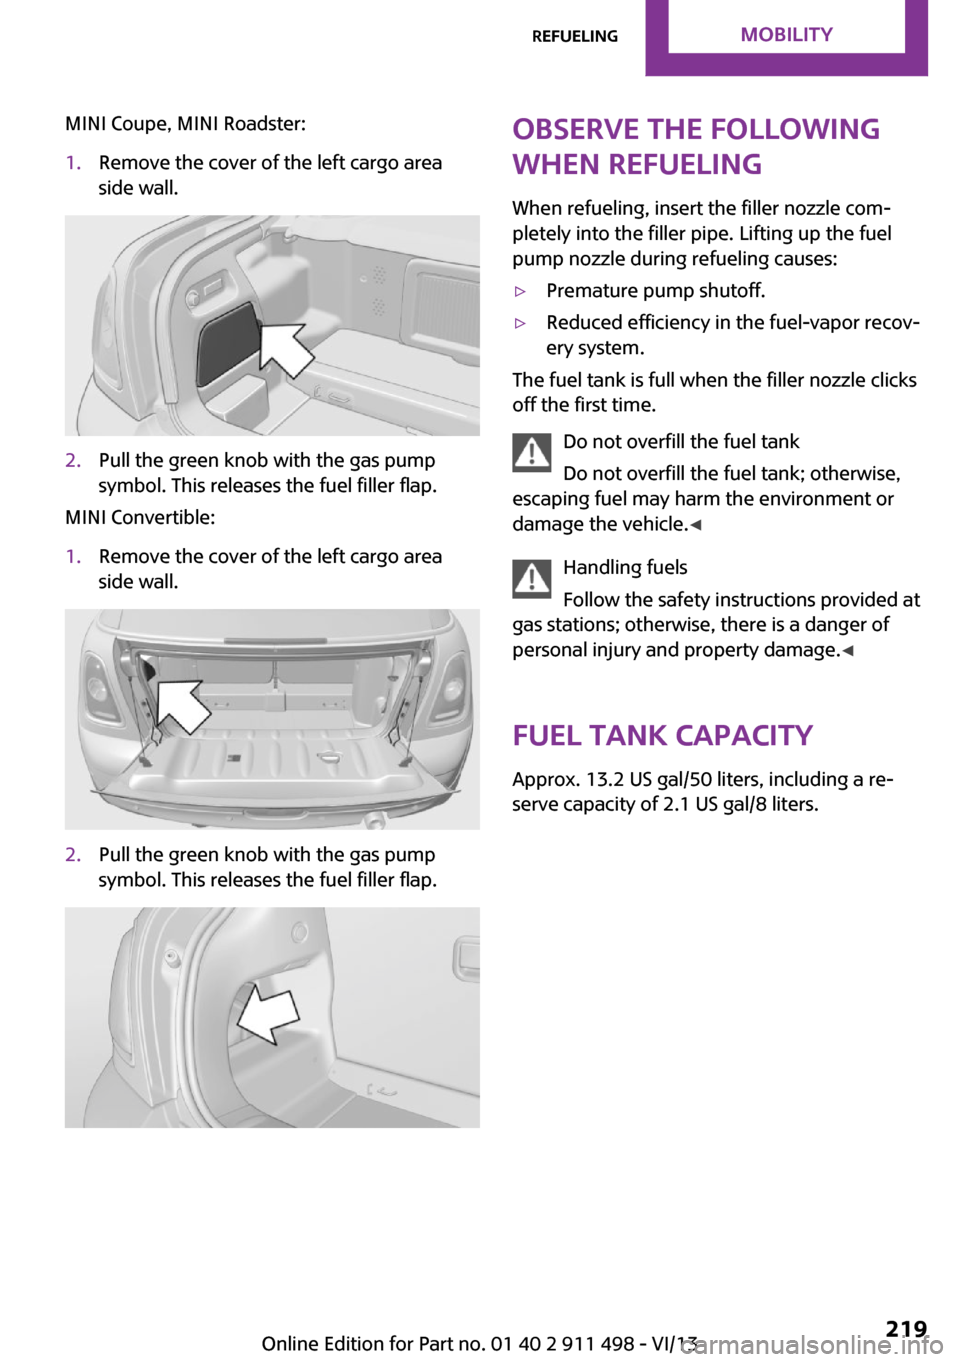 MINI Roadster 2014  Owners Manual (Mini Connected) MINI Coupe, MINI Roadster:1.Remove the cover of the left cargo area
side wall.2.Pull the green knob with the gas pump
symbol. This releases the fuel filler flap.
MINI Convertible:
1.Remove the cover o